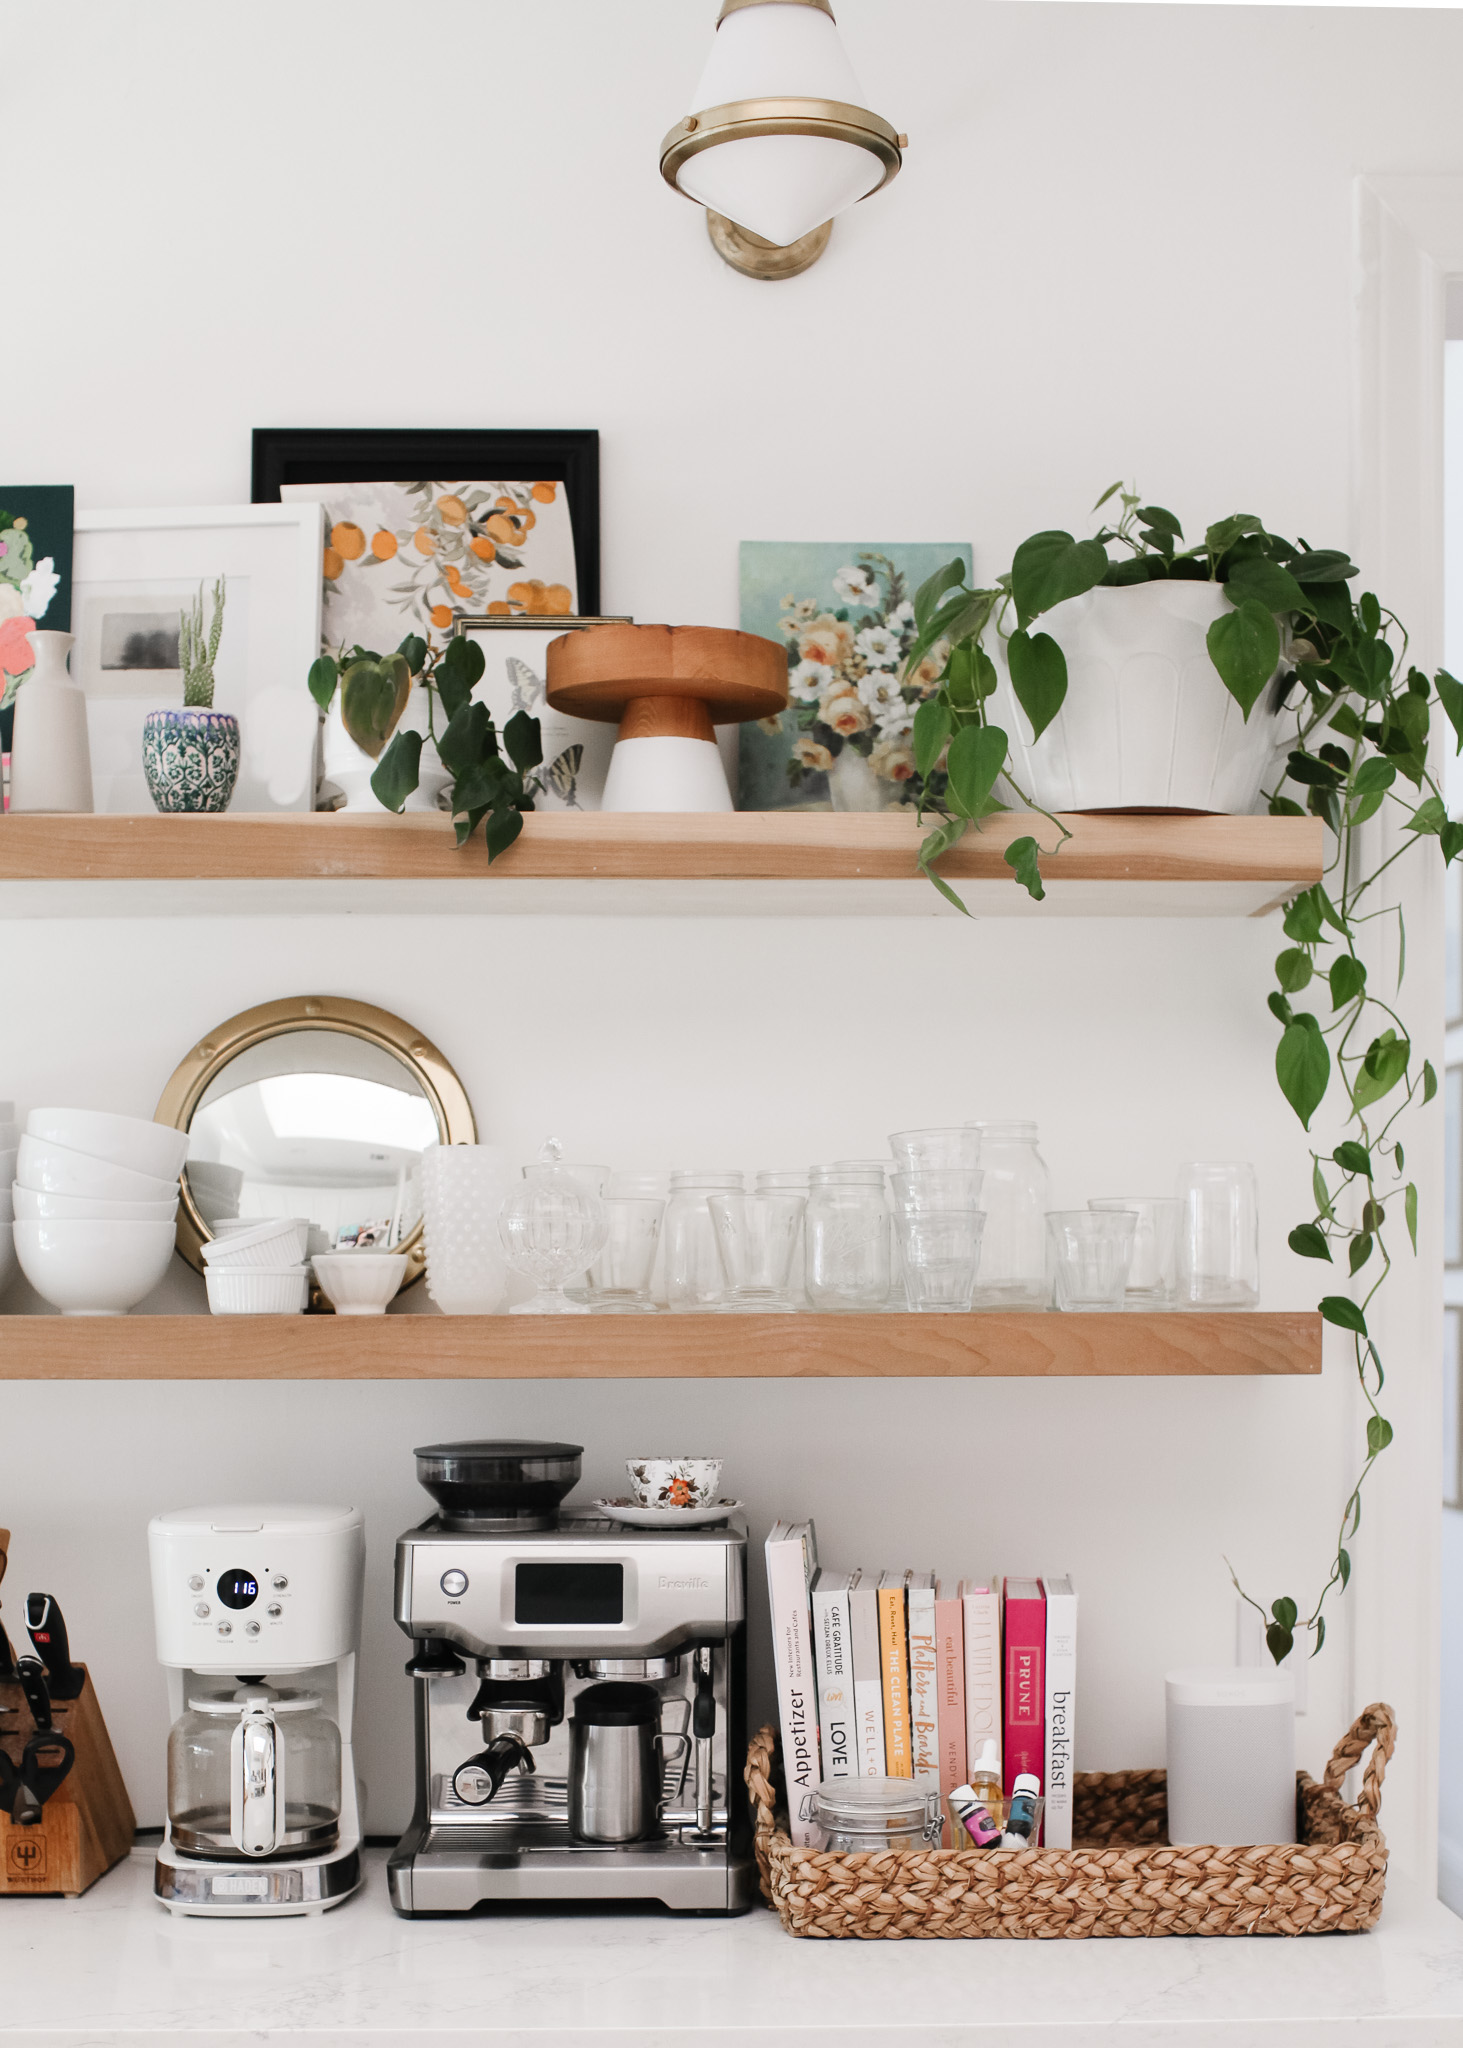 open kitchen shelving with glasses, plants and art. espresso machine and coffee maker on counter